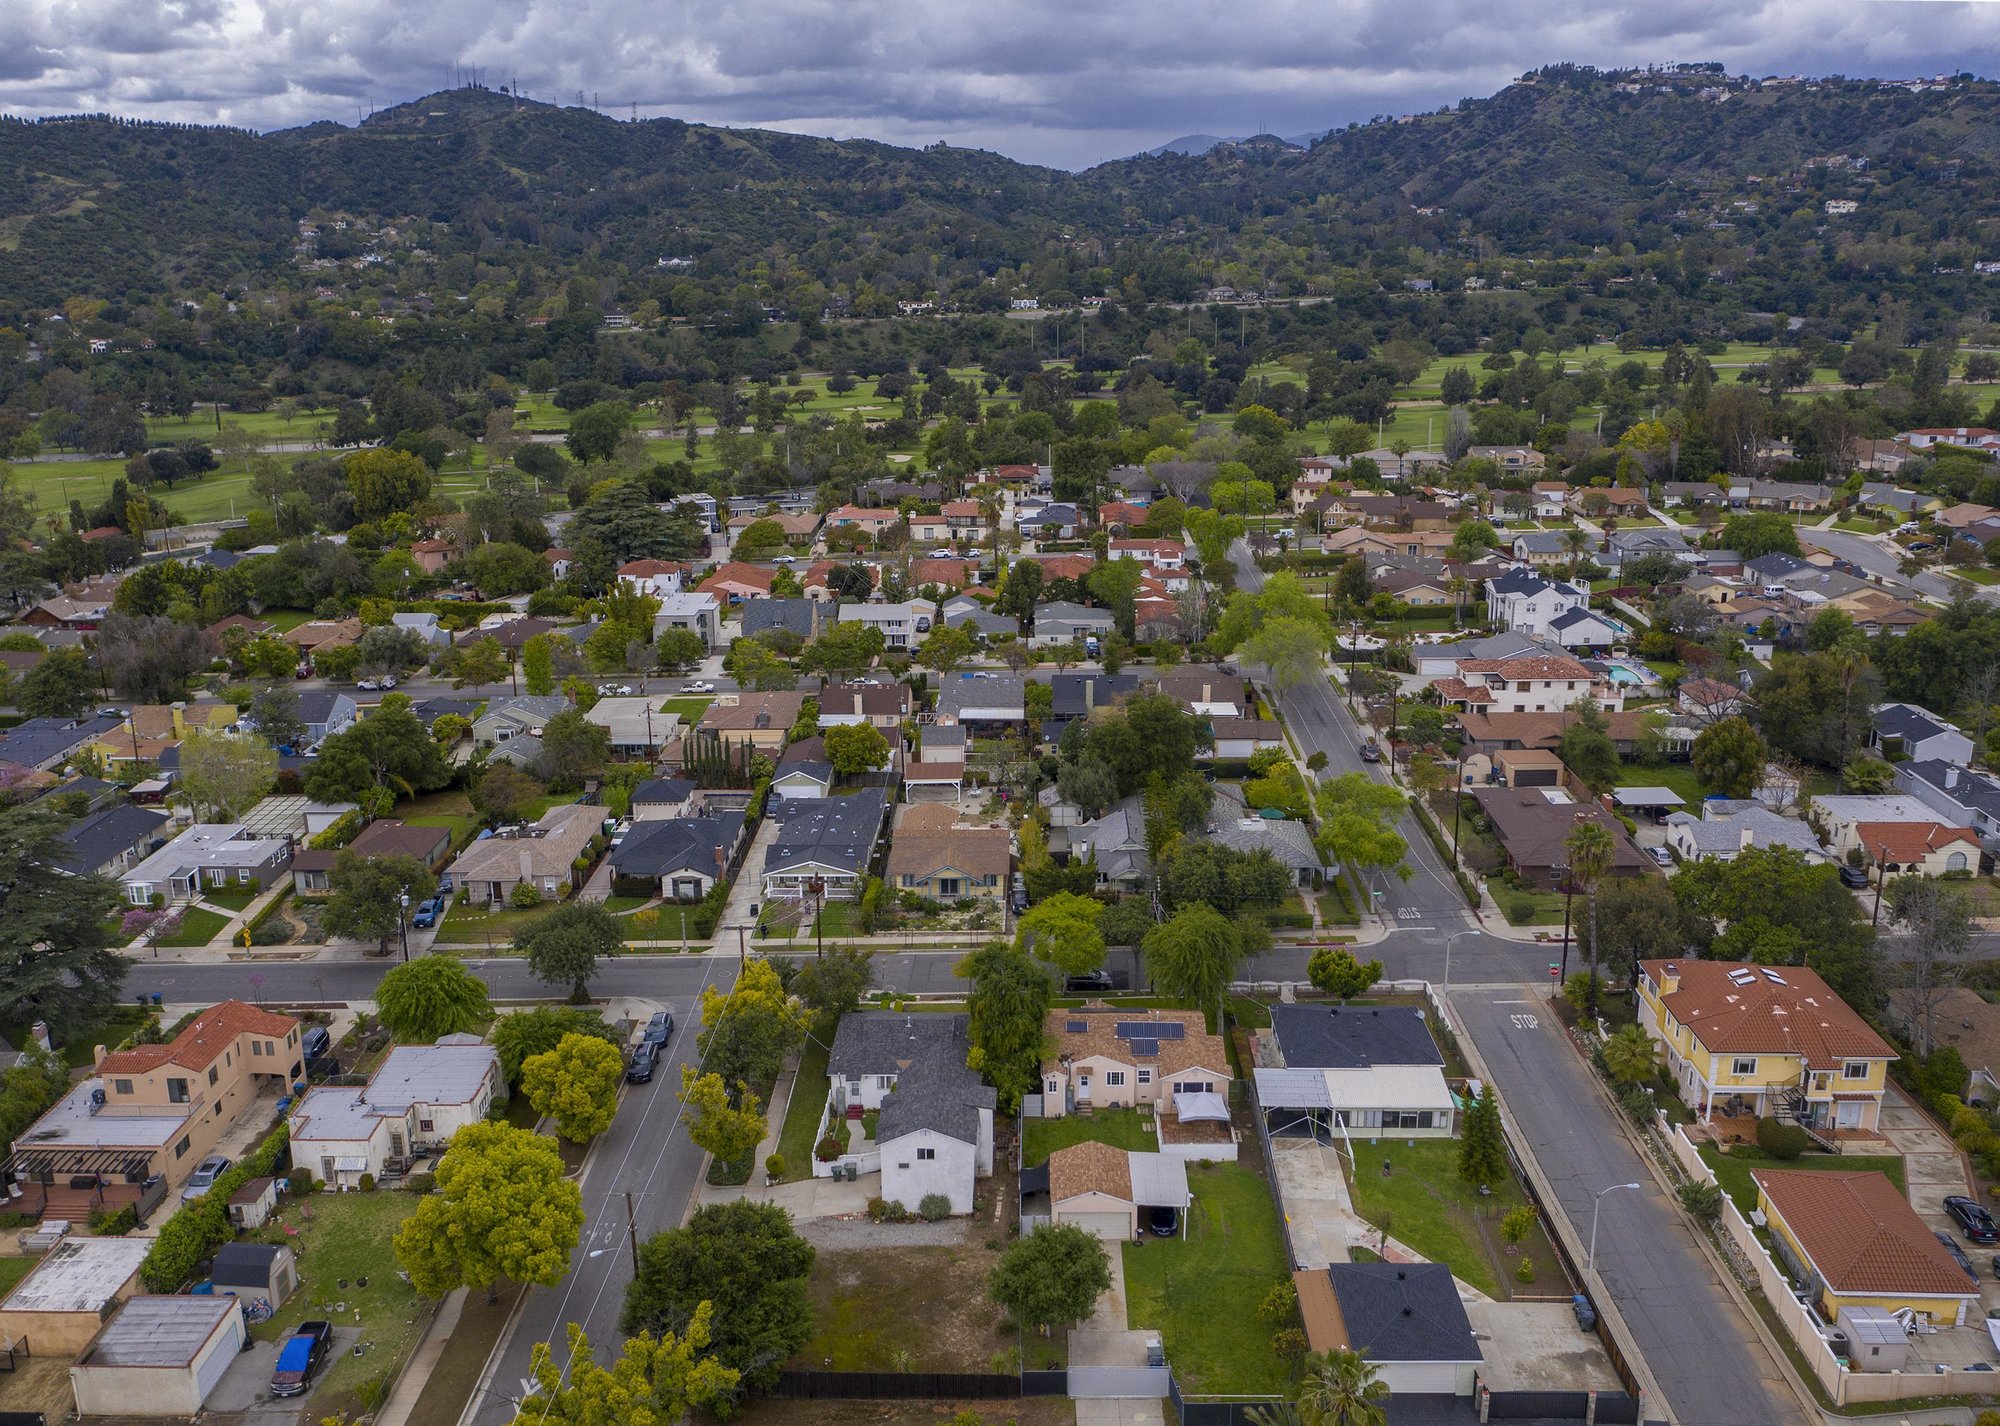 Suburban homes with mountainscape in distance - Source: David McNew // Getty Images